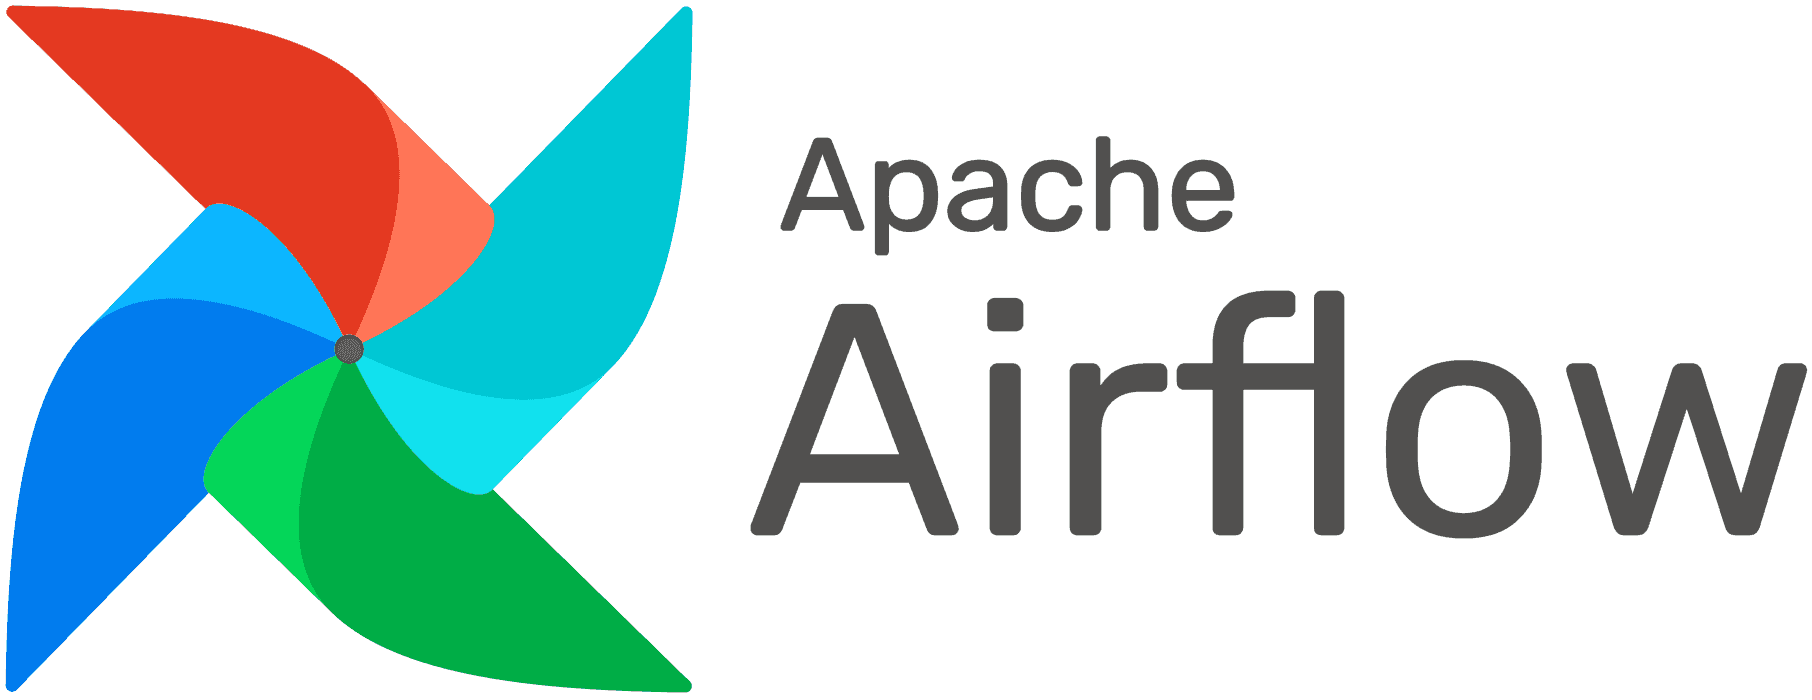 Apache Airflow.png